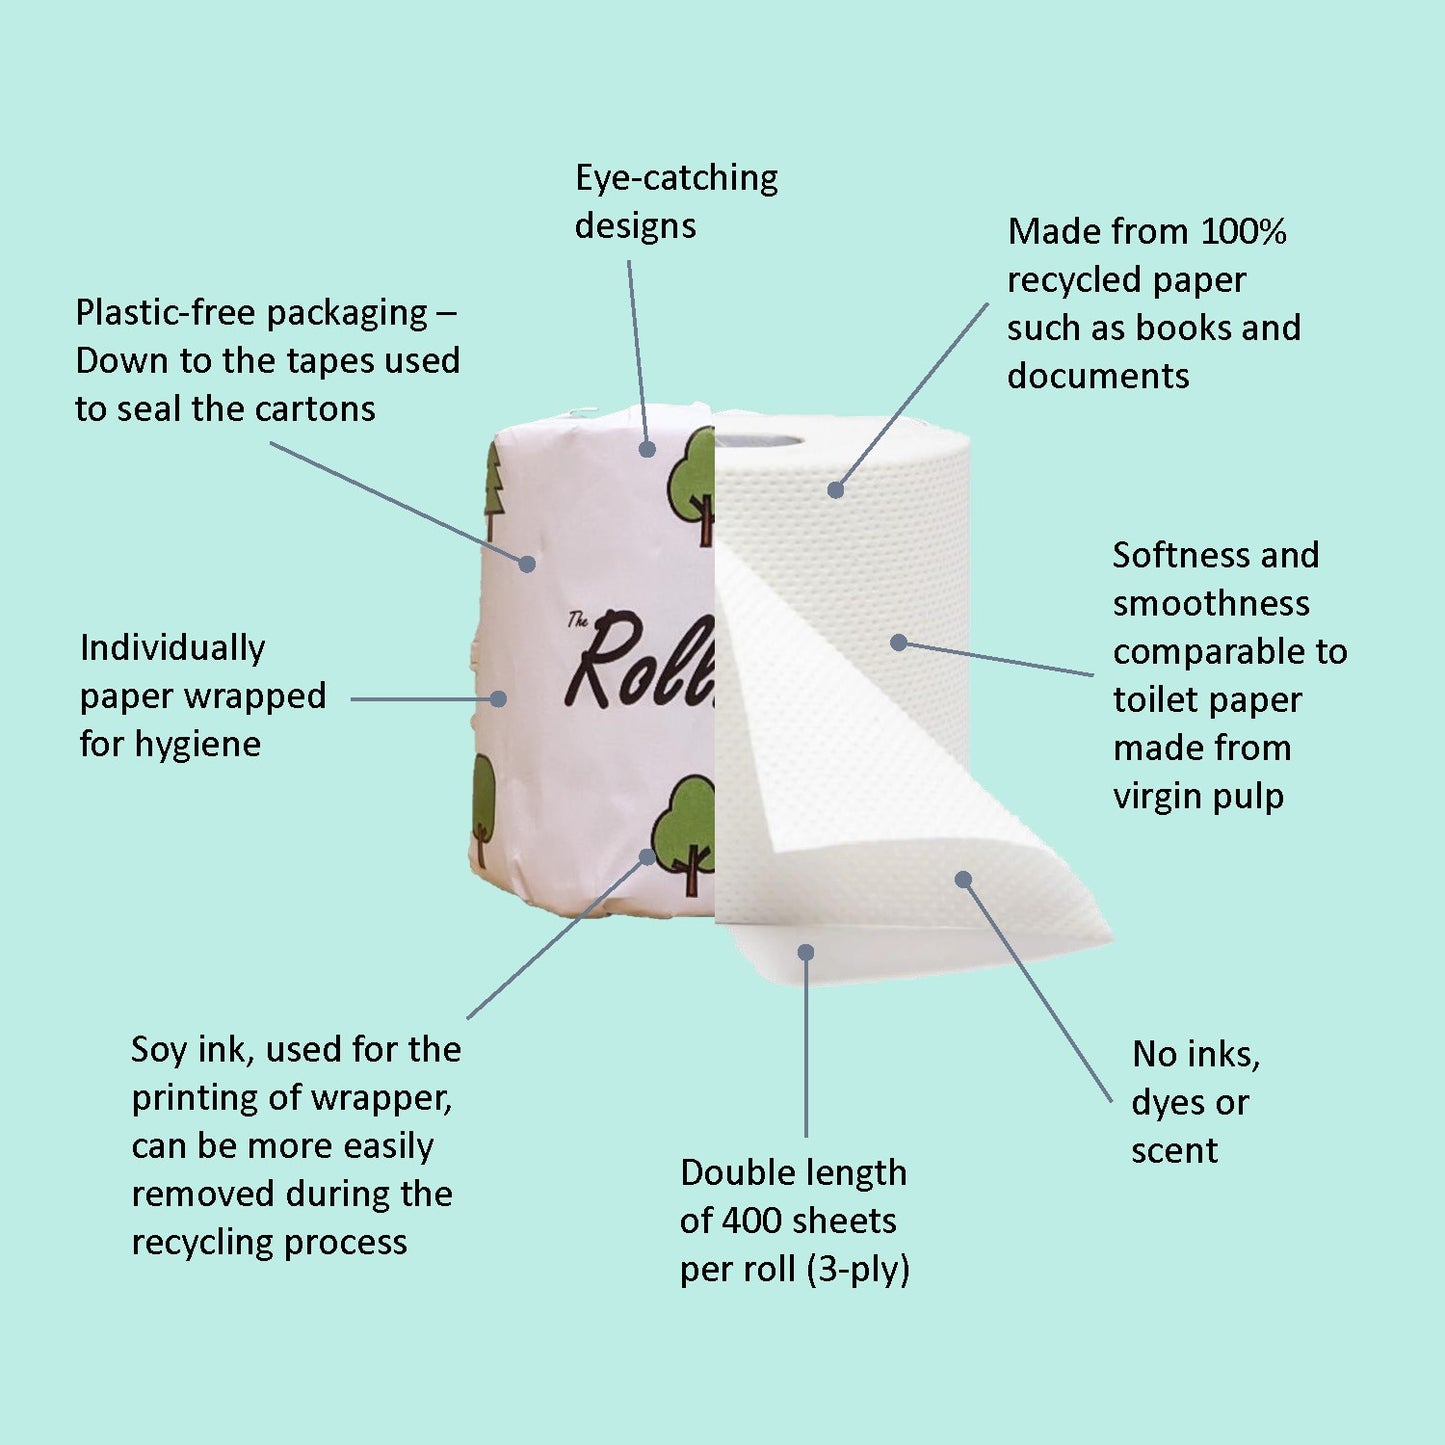 the rollieco branded eco toilet roll with multiple pointers showcasing the product features such as made from 100% recycled paper, smooth and soft, plastic free packaging, double length of 400 sheets per roll, 3 ply.